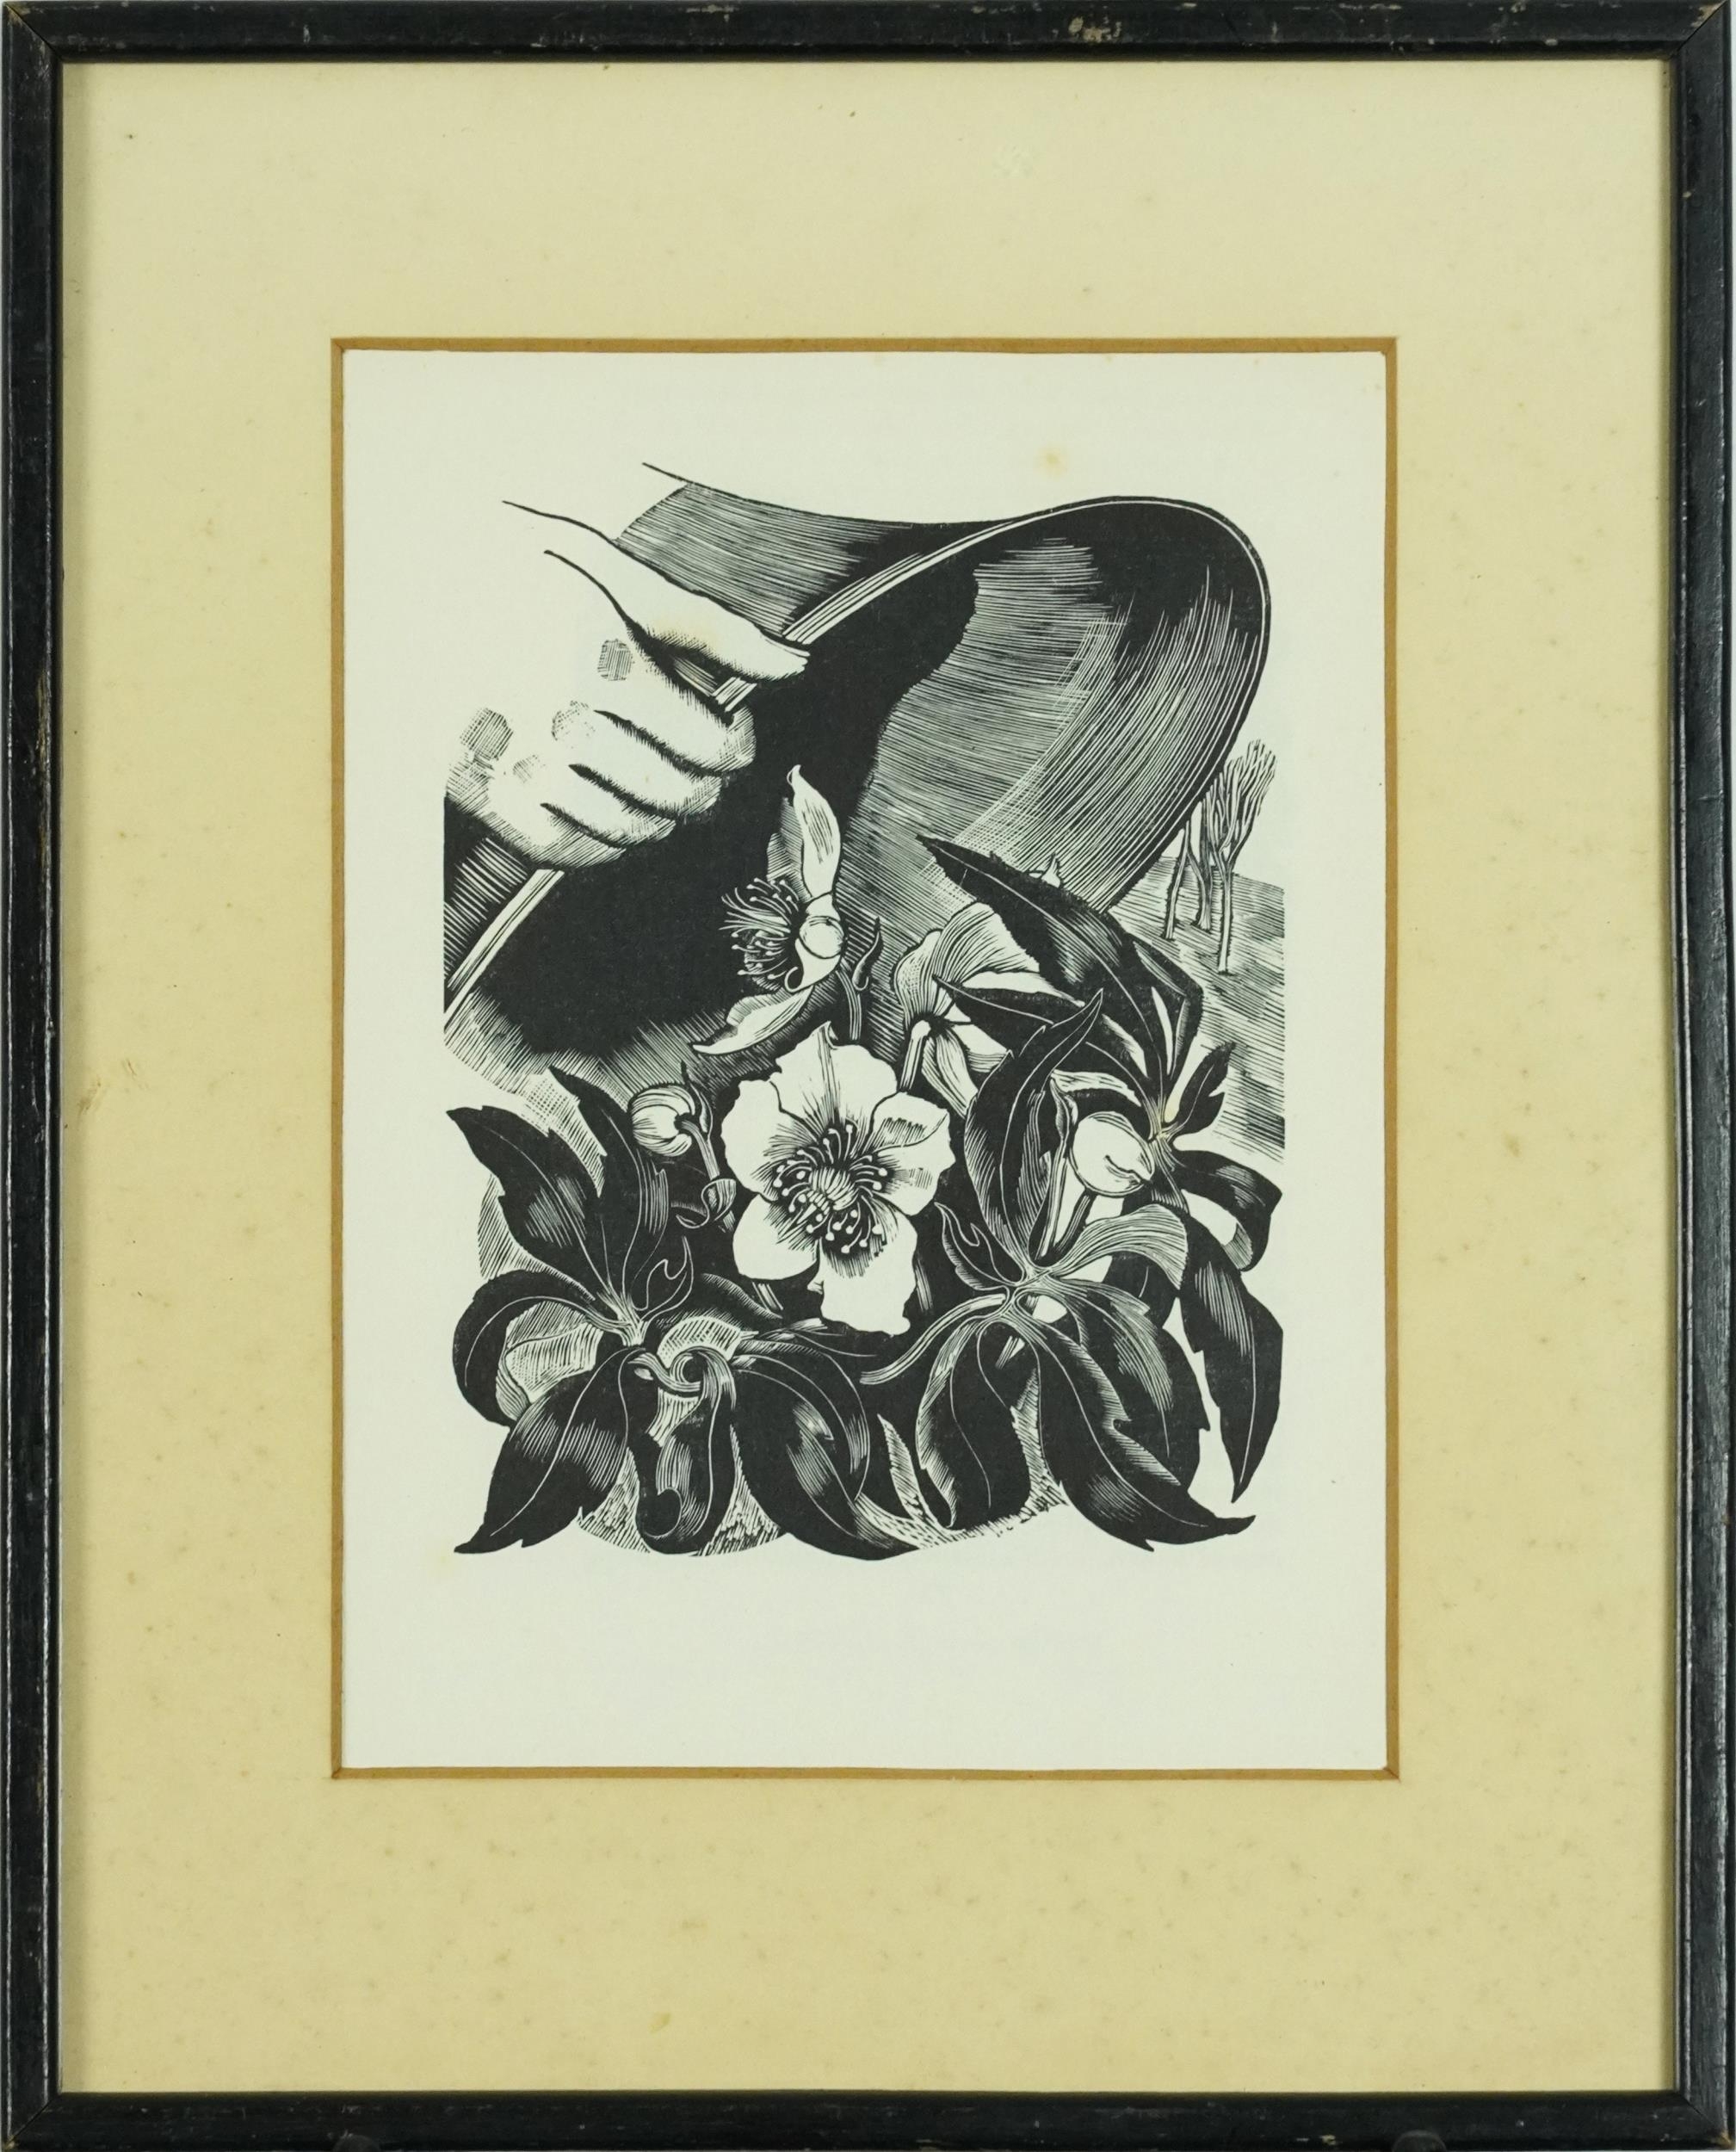 John Nash - Flowers and faces, wood engraving inscribed The Golden Cockerel Press Prospectus 1935 - Image 2 of 4